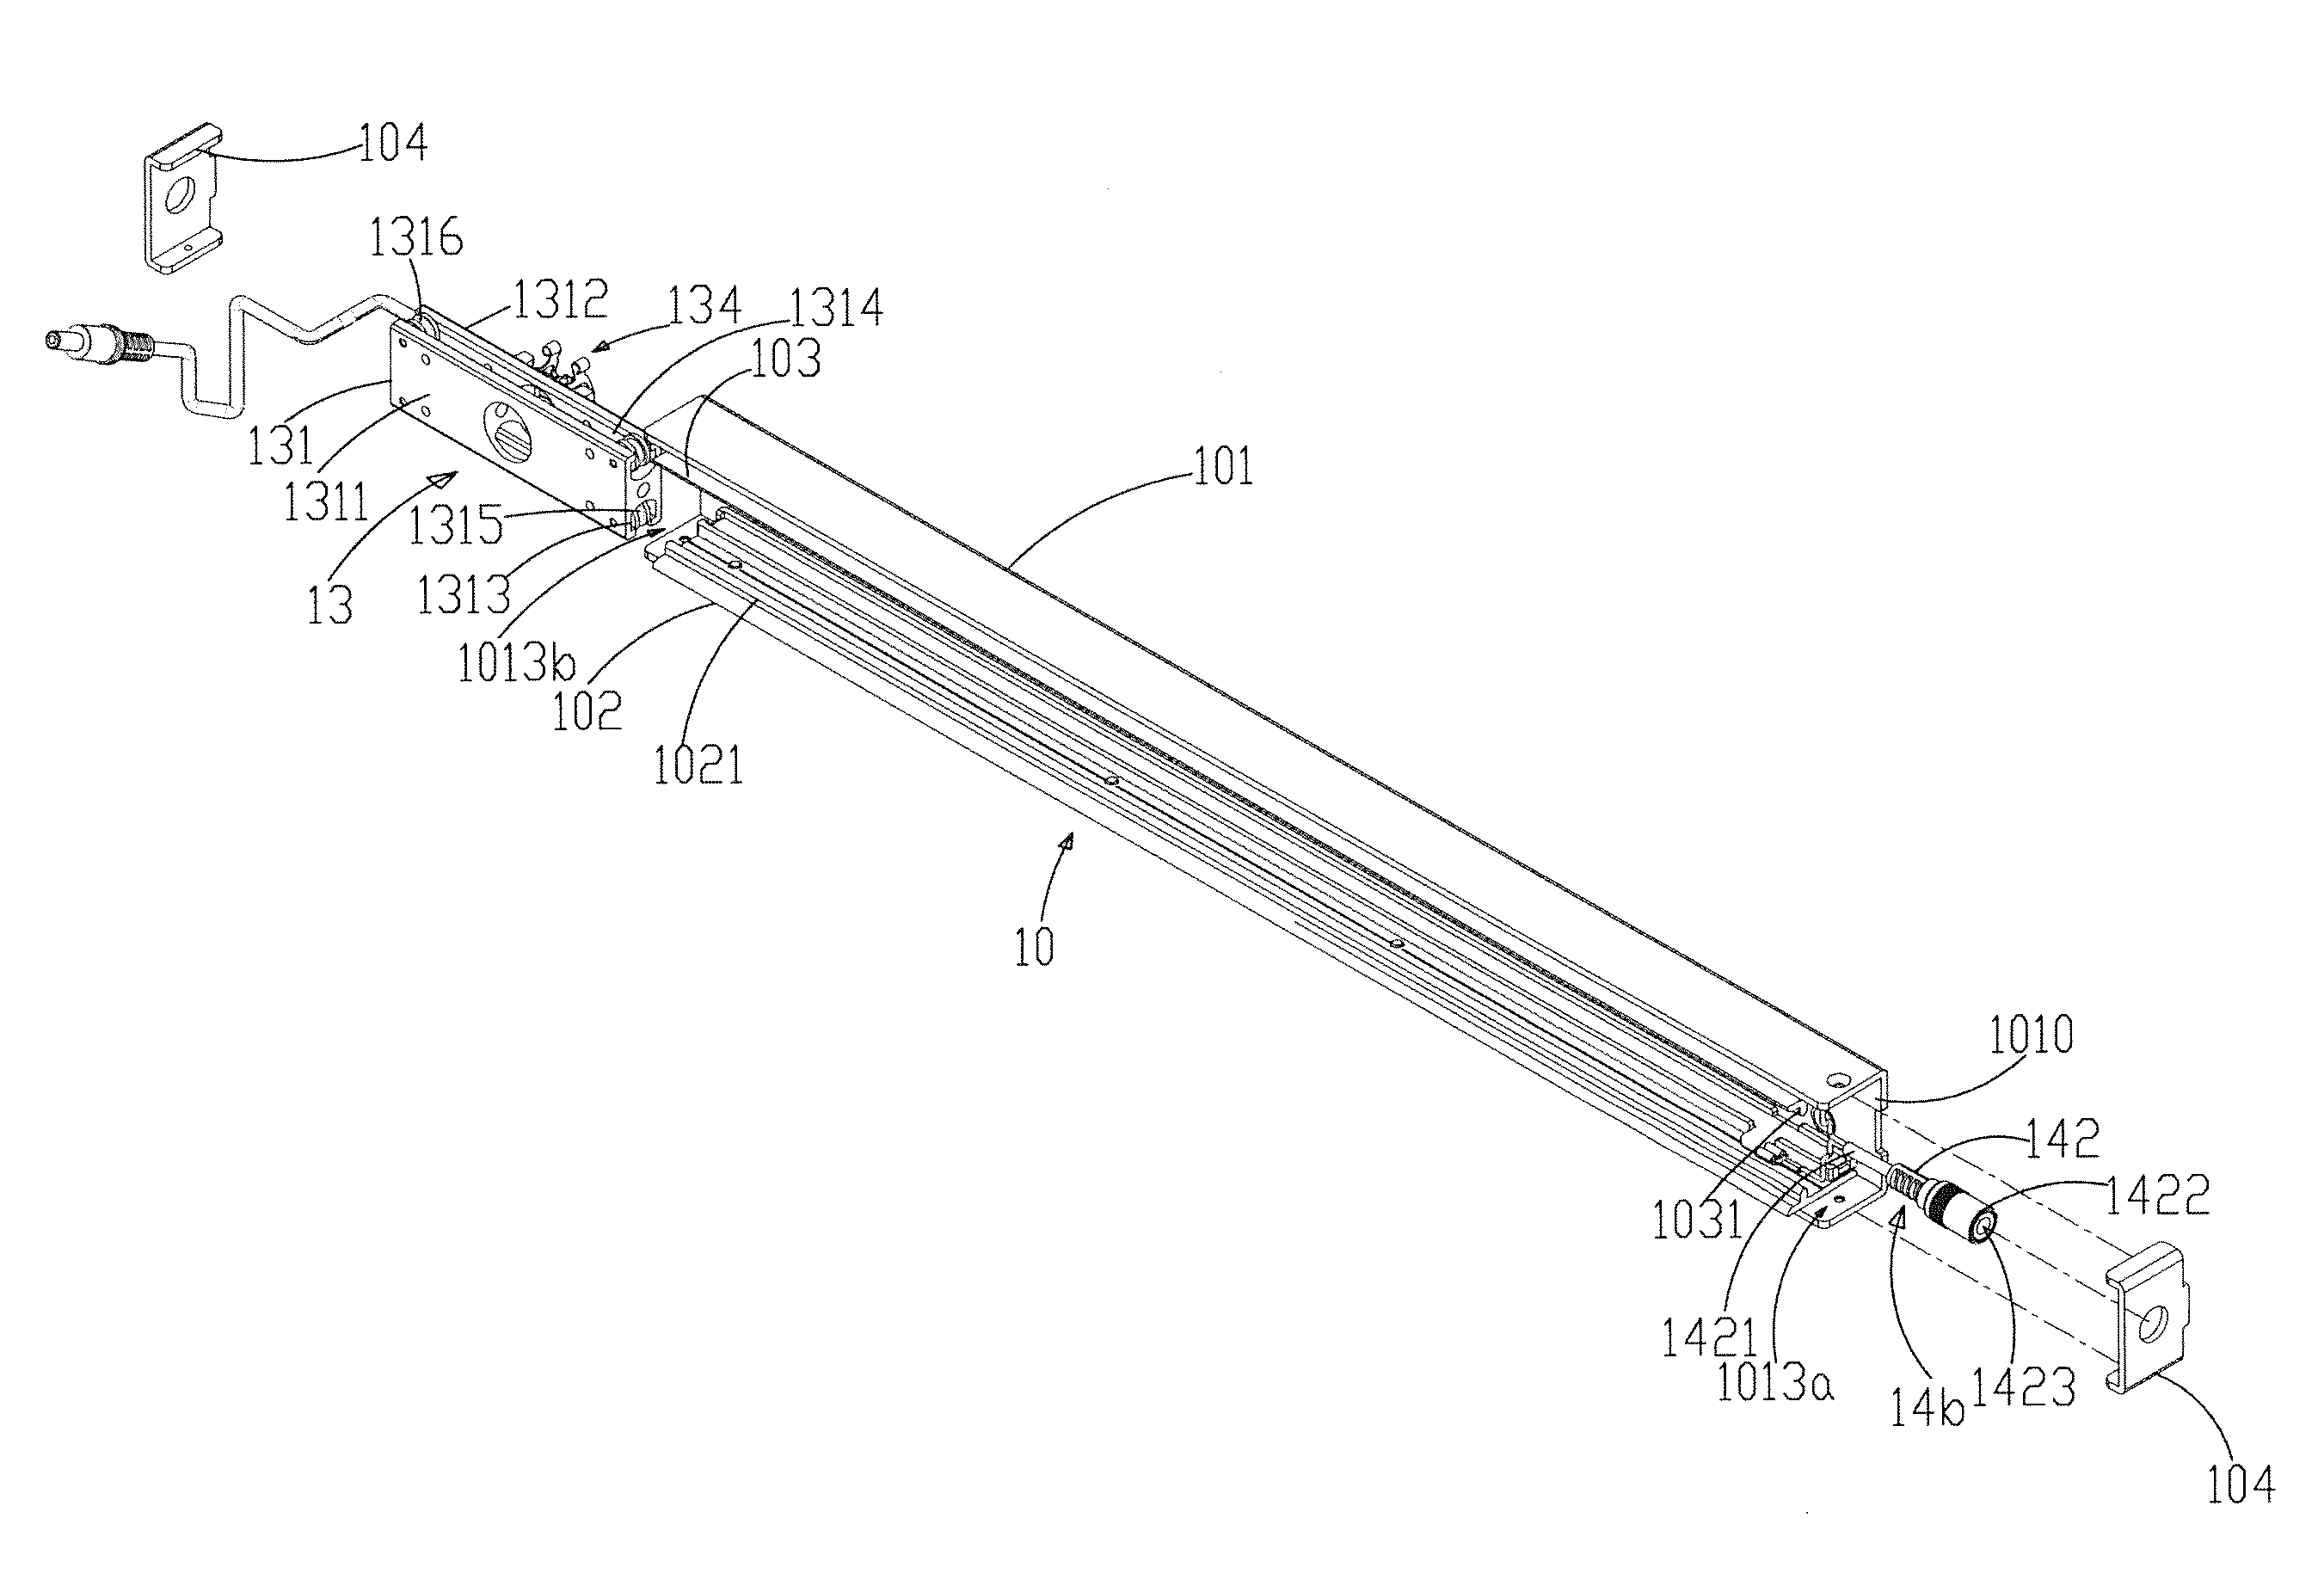 Track structure capable of supplying power